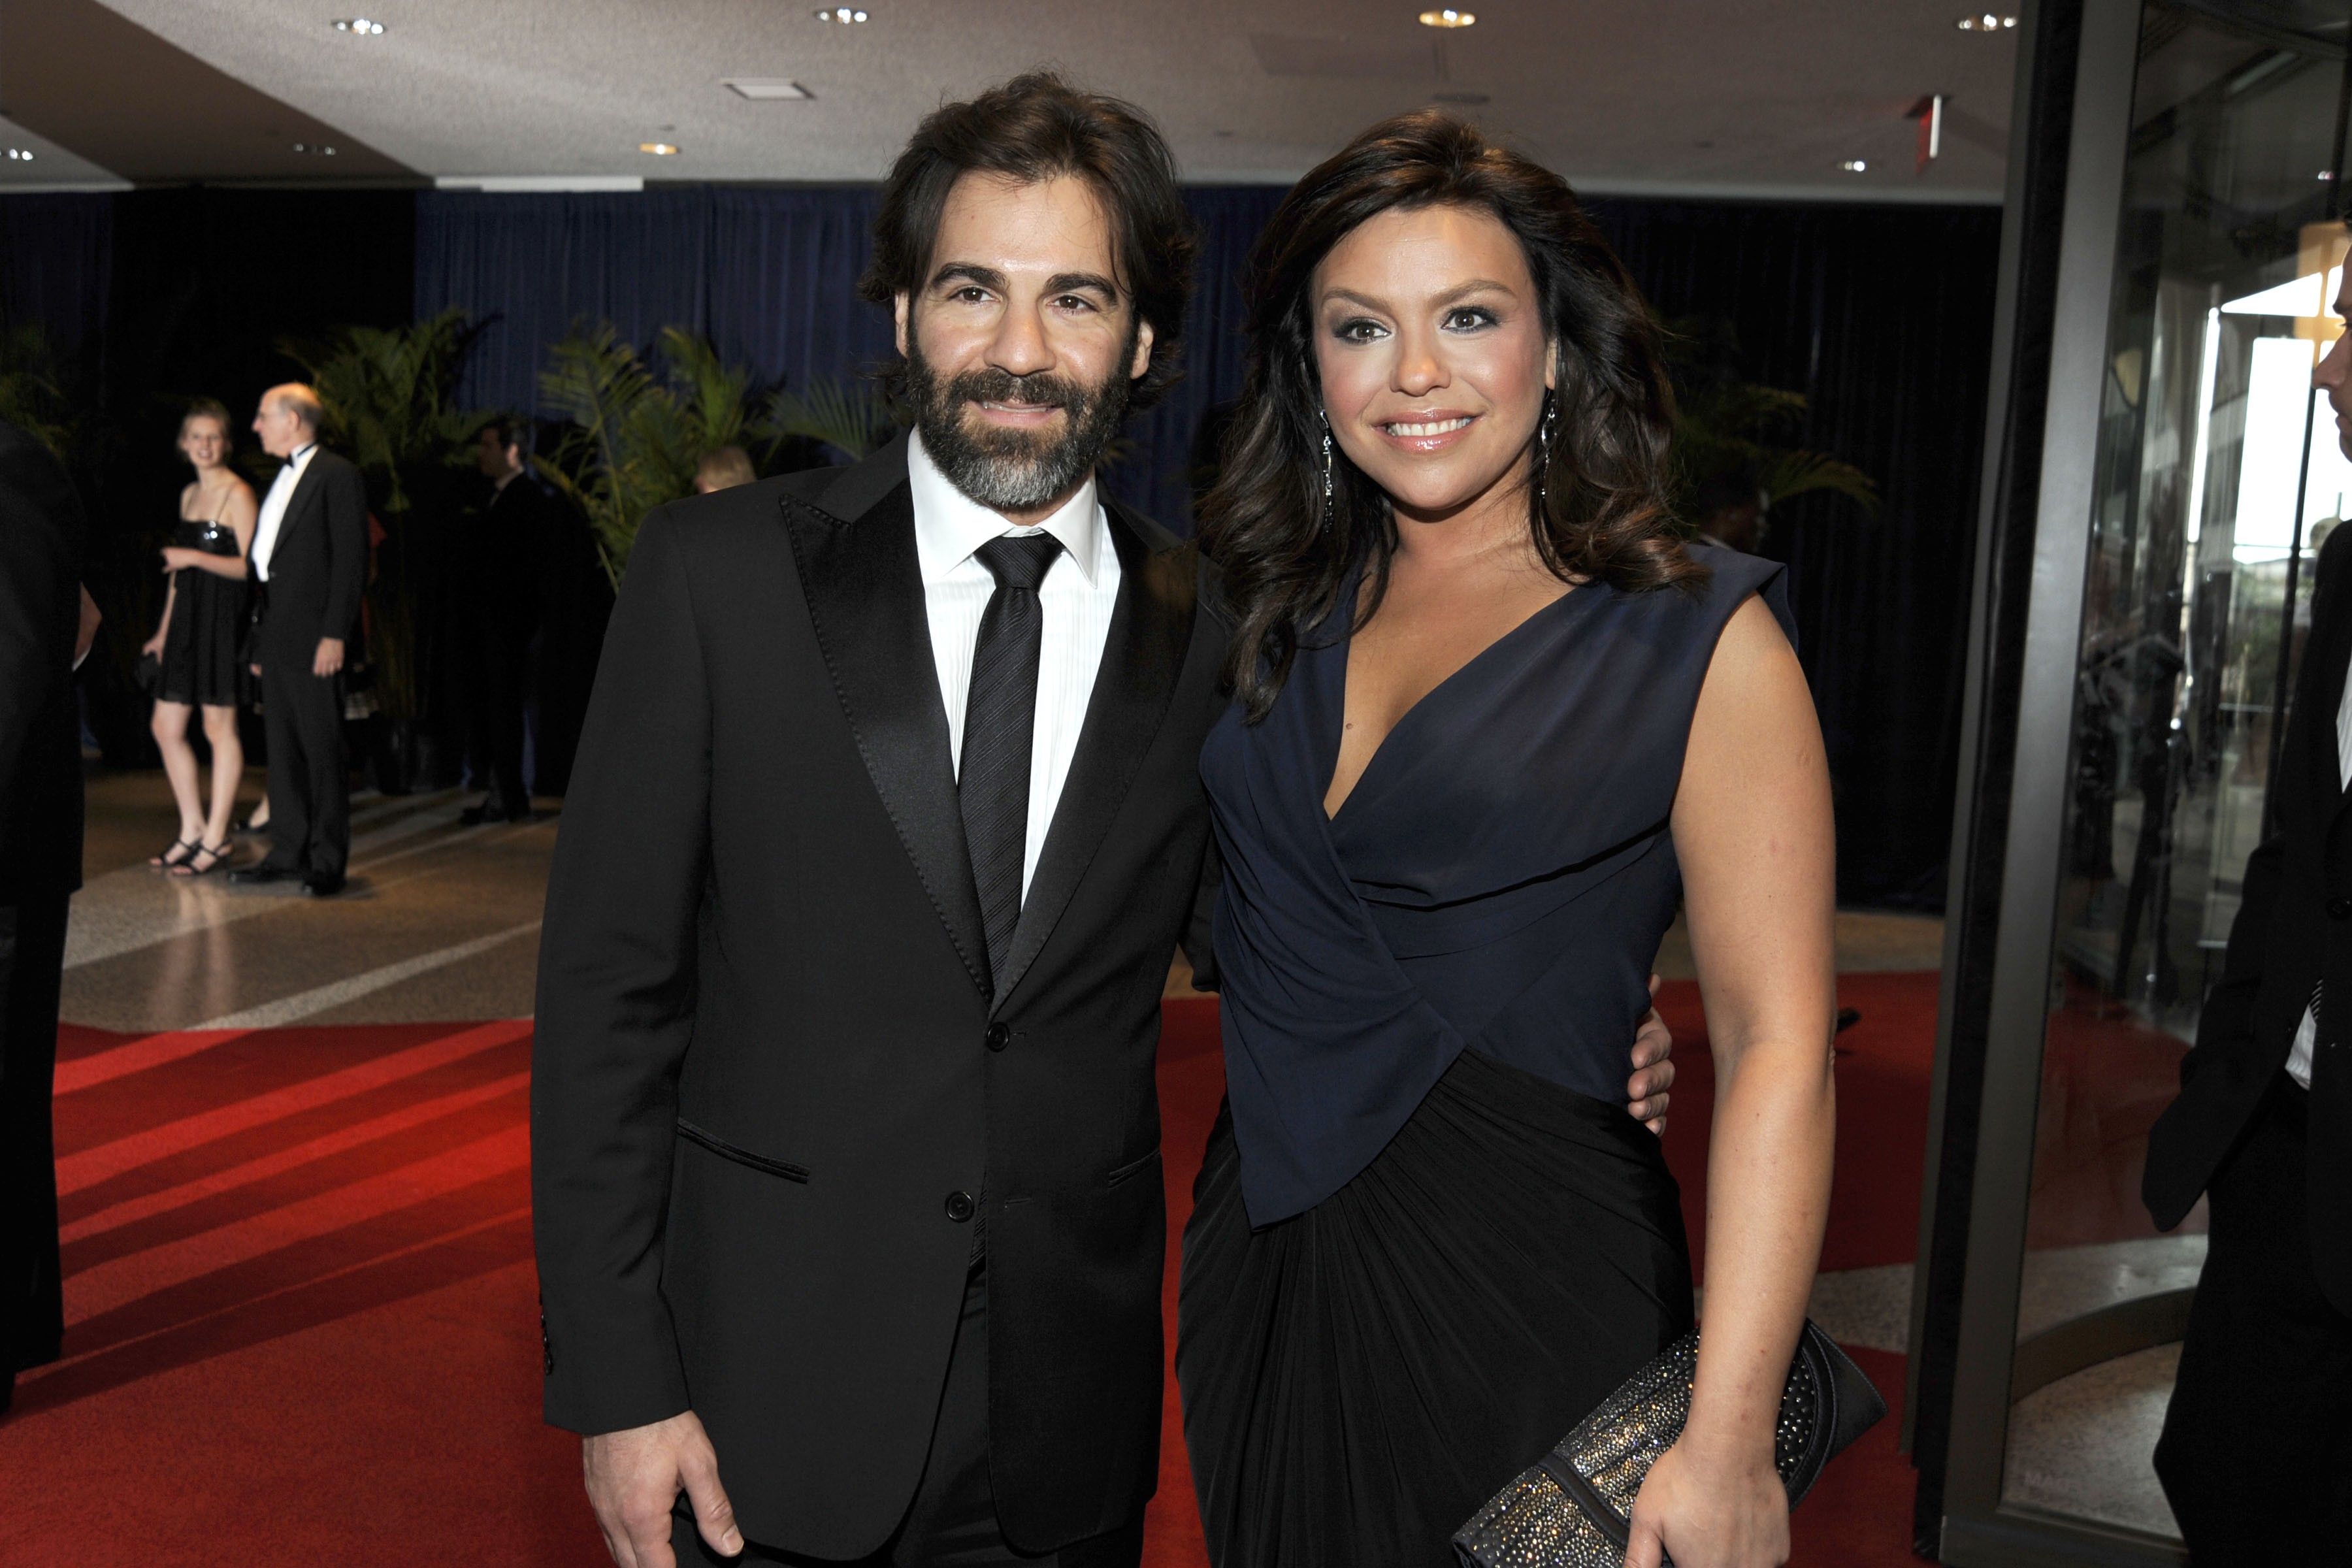 Rachael Ray and John Cusimano at the 2010 White House Correspondent's Dinner. | Source: Getty Images